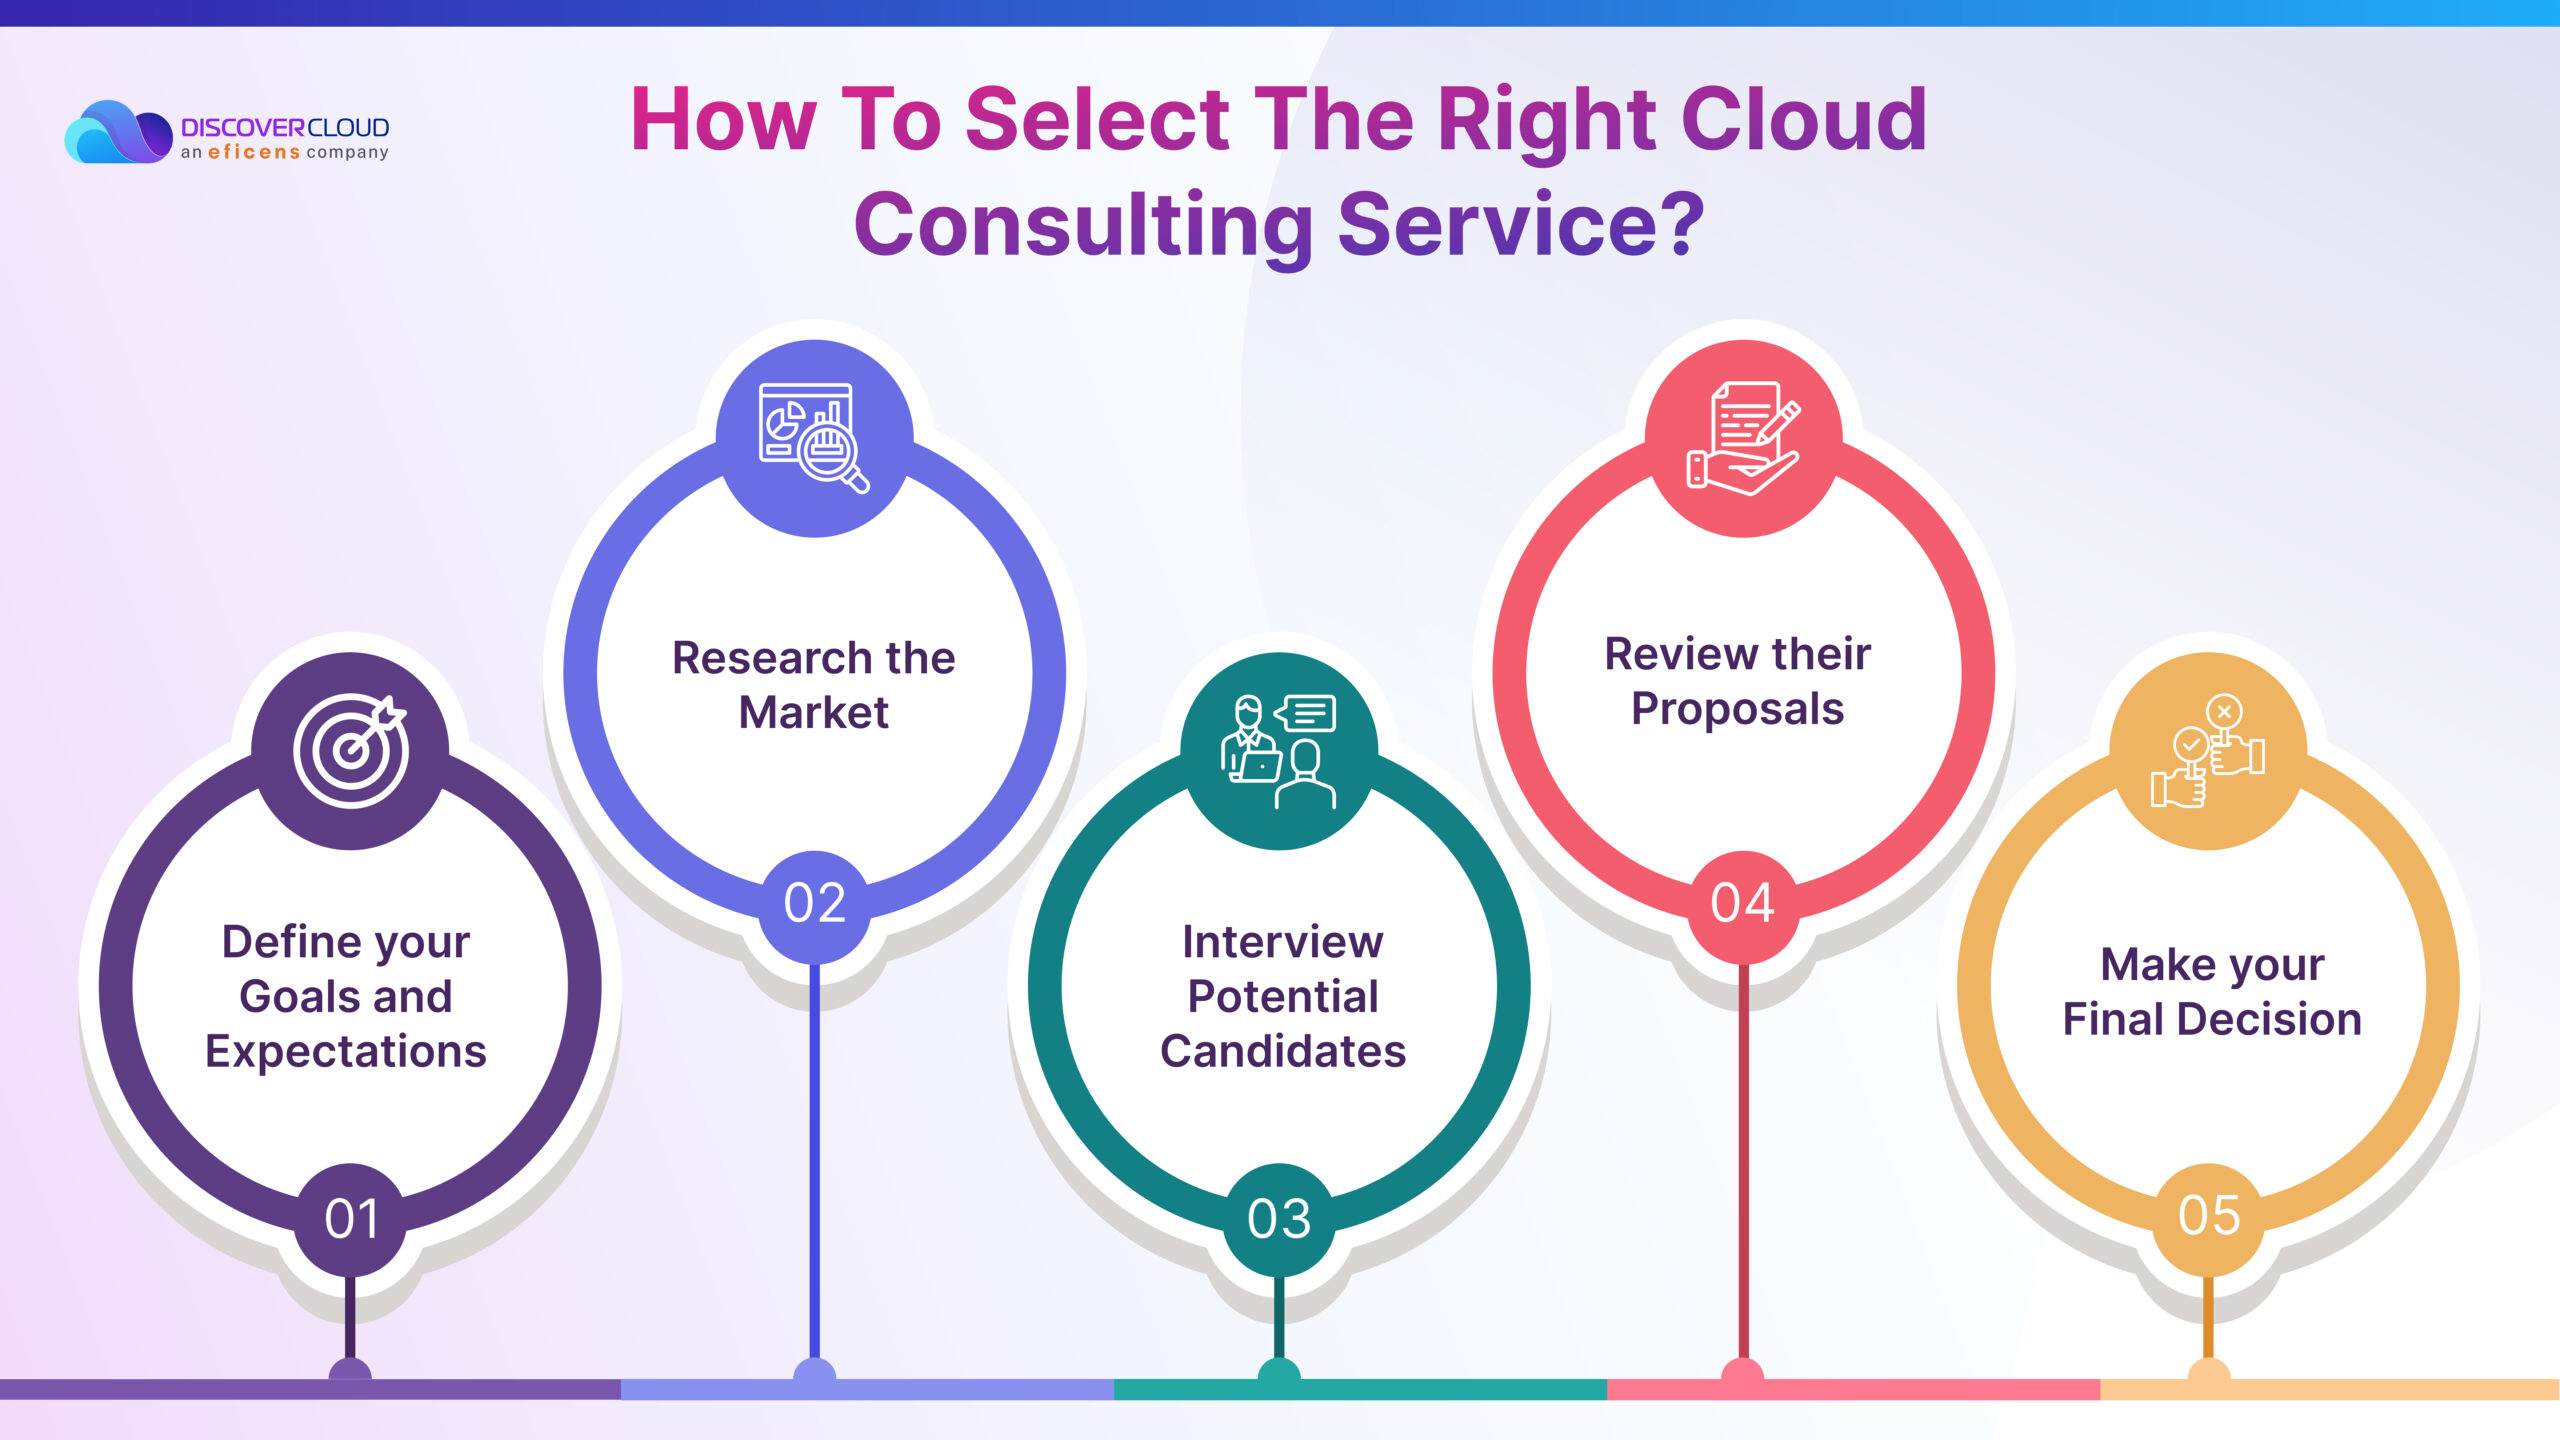 How To Select The Right Cloud Consulting Service?